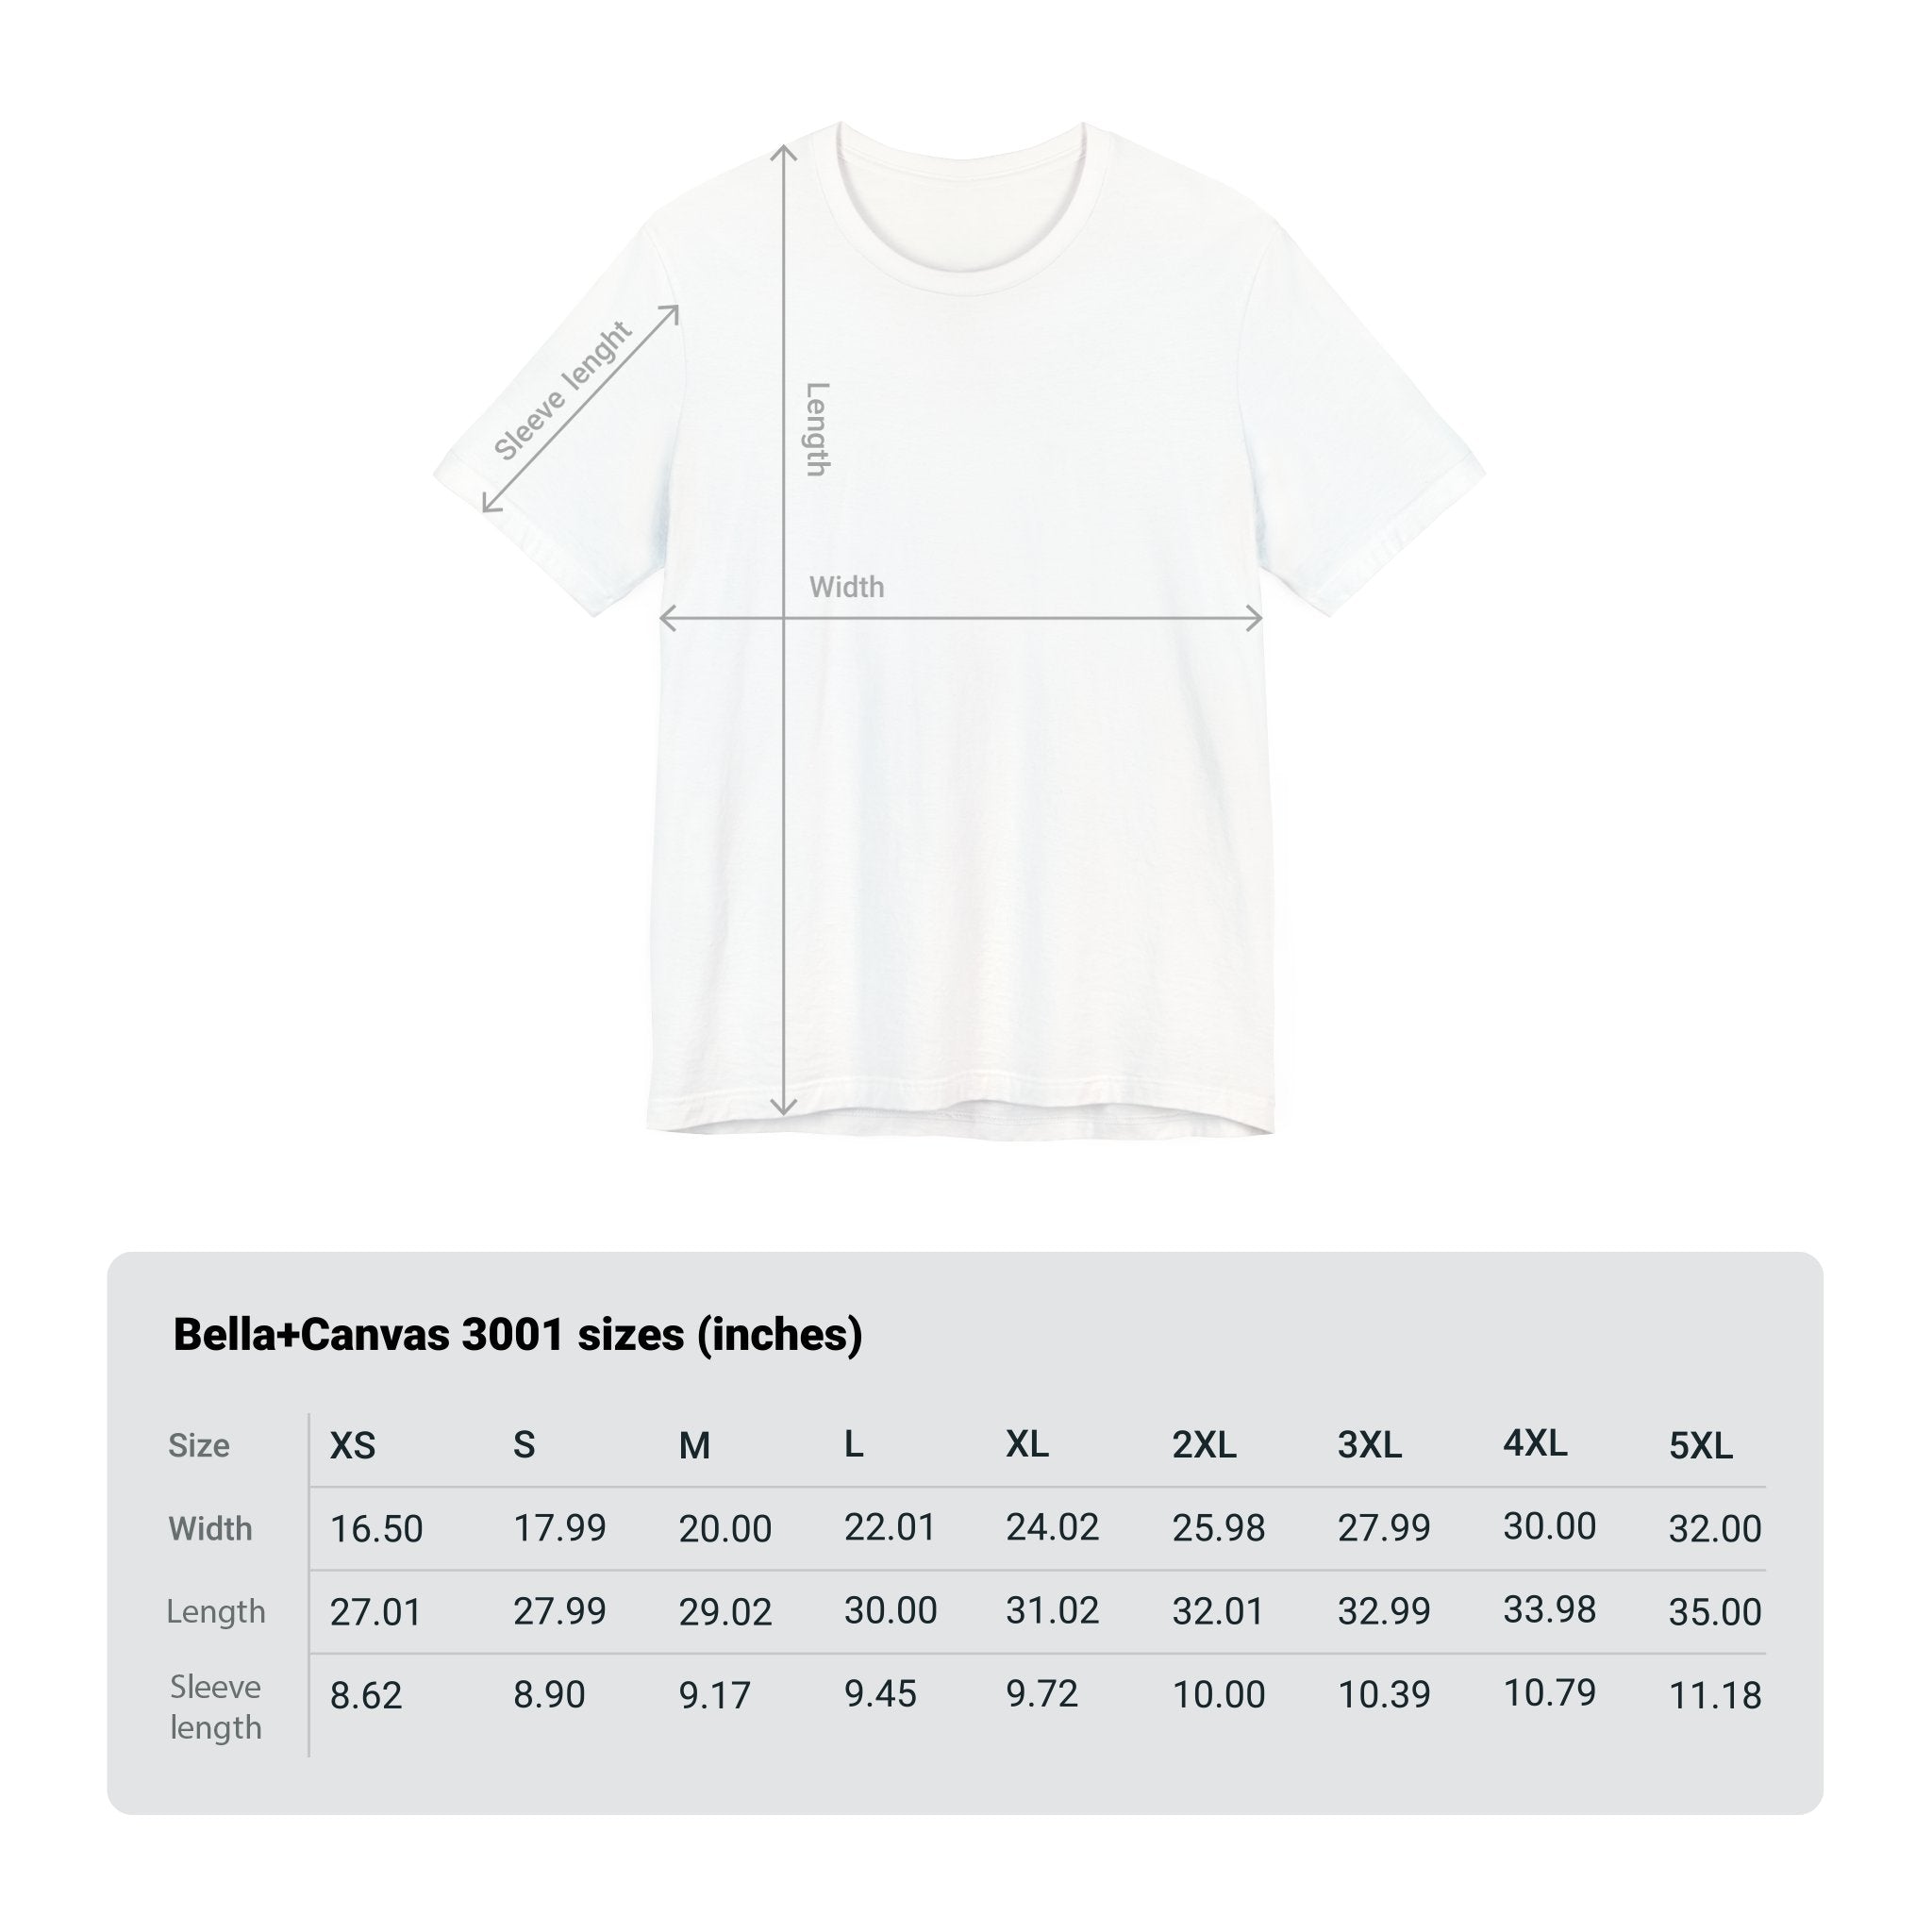 Unisex jersey tee with dimension lines and a size chart below showing measurements from XS to 5XL.
Product Name: W-H-At-? = What T-shirt